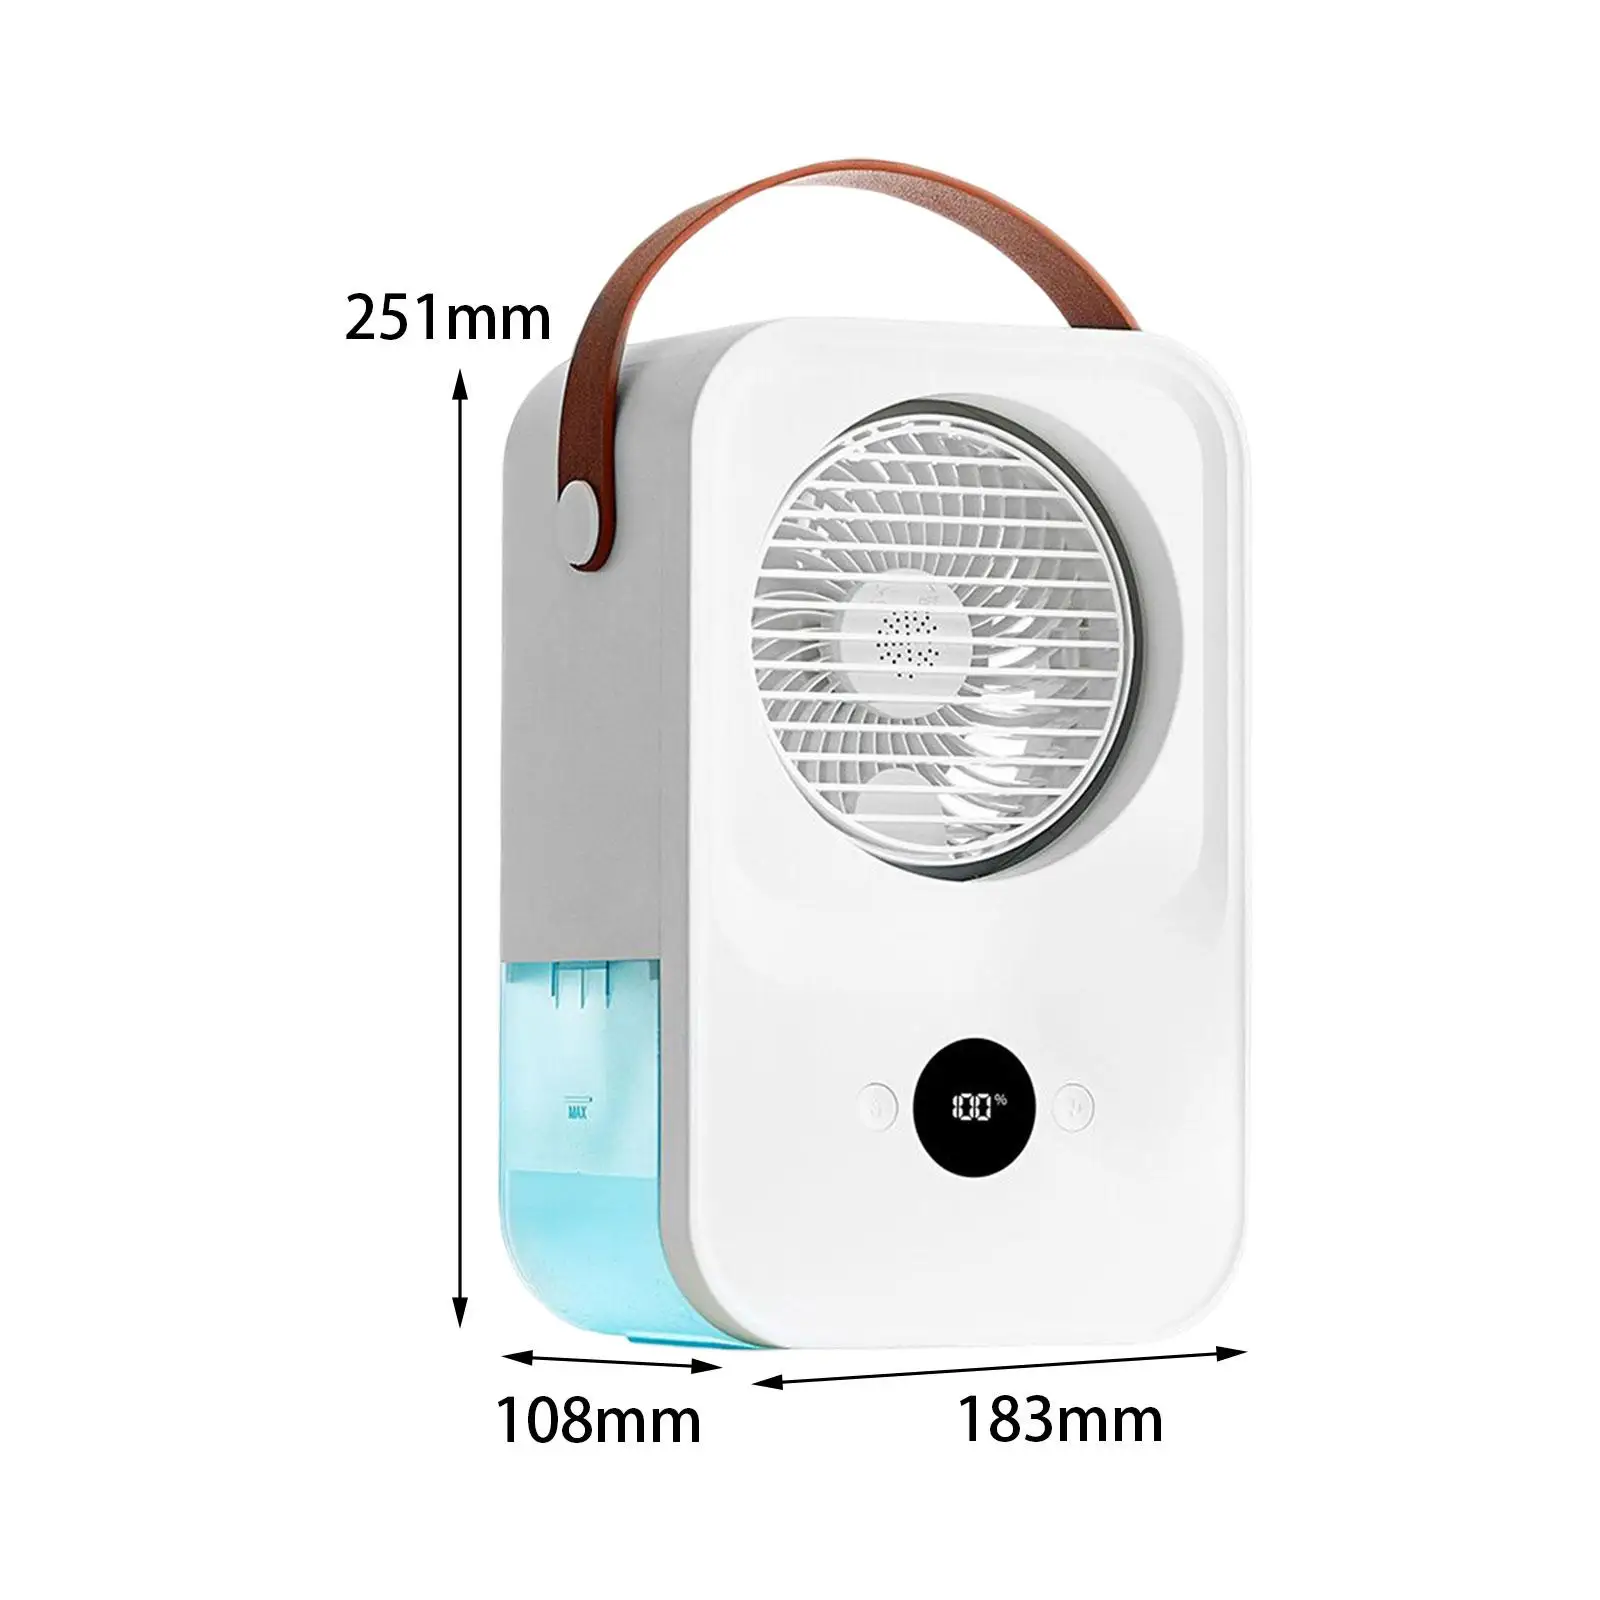 Mini Air Conditioner 650ml Water Tank Rechargeable Convenient with Carrying Handle for Home Office LCD Display Desk Air Cooler